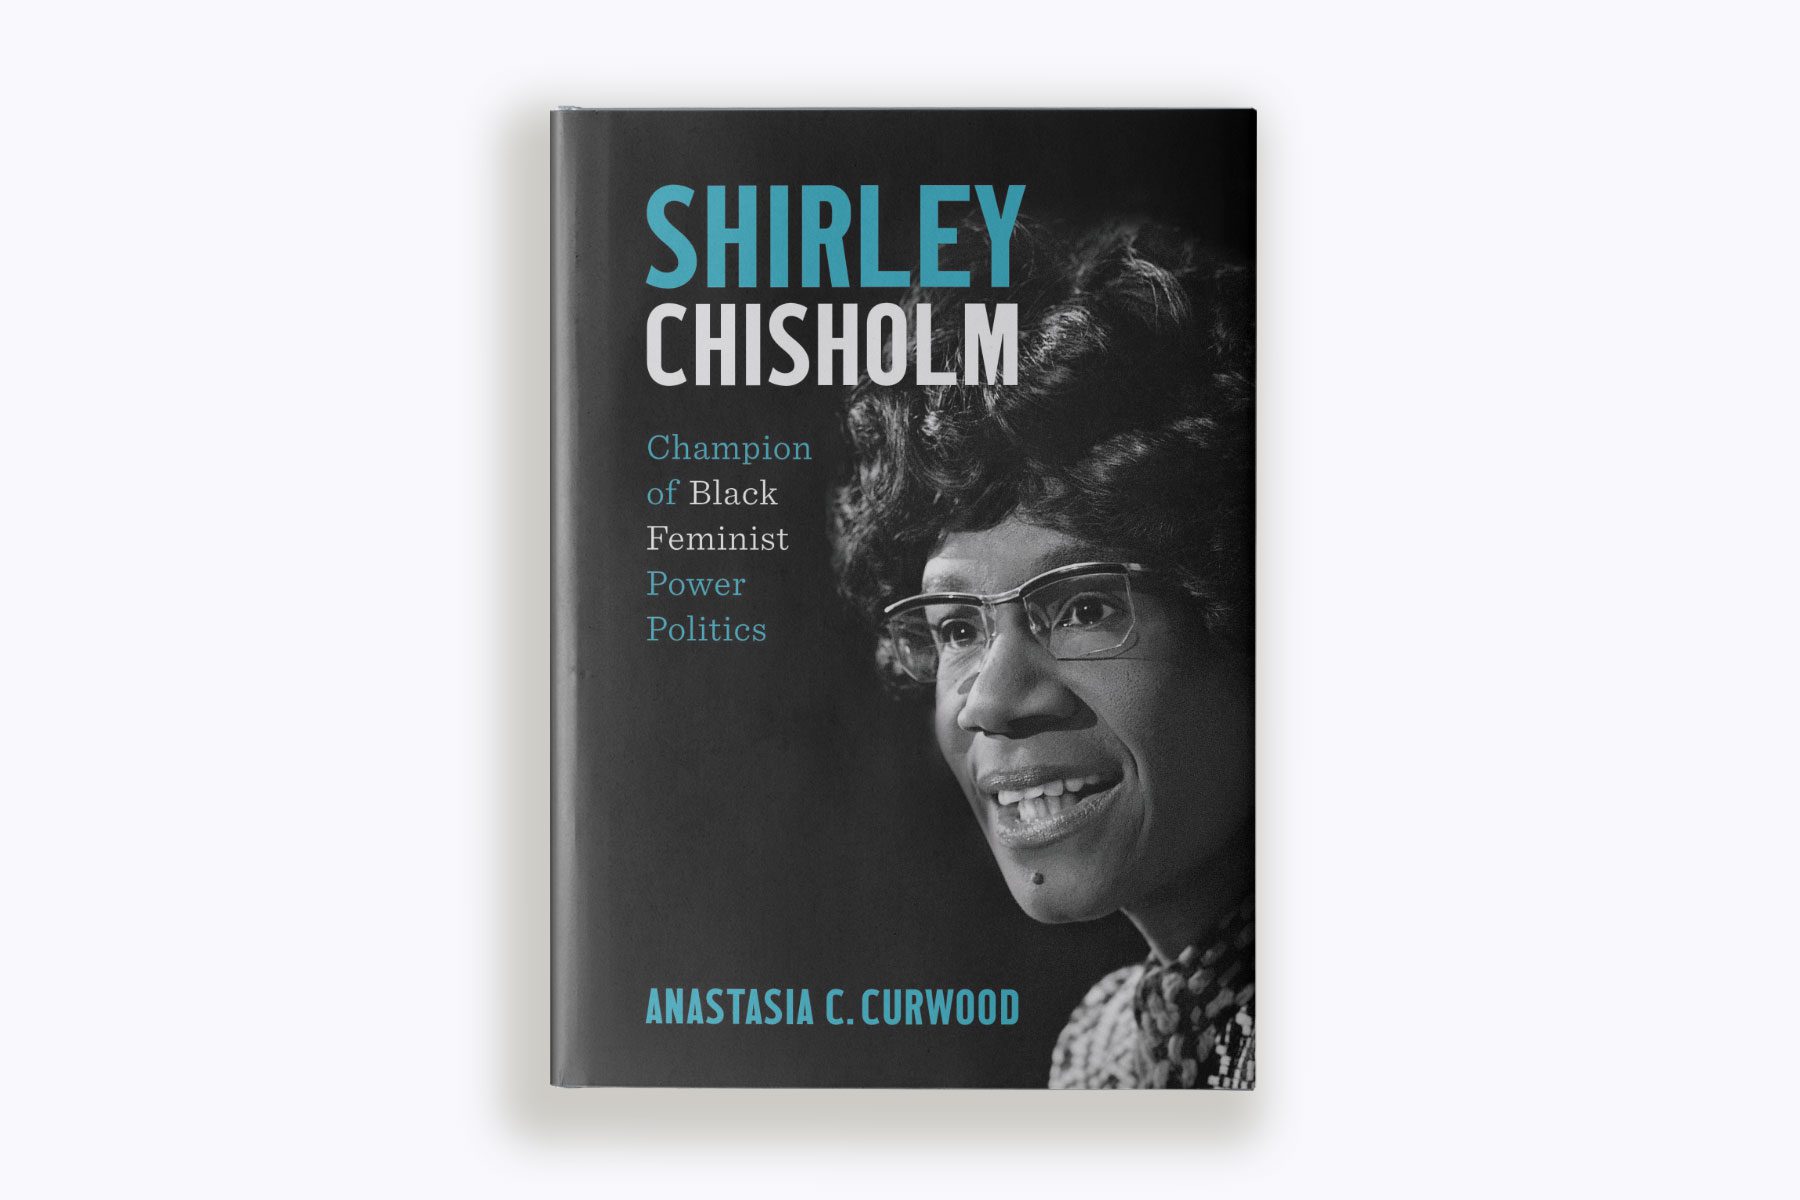 The cover of Anastacia Curwood's book, "Shirley Chisholm: Champion of Black Feminist Power Politics)